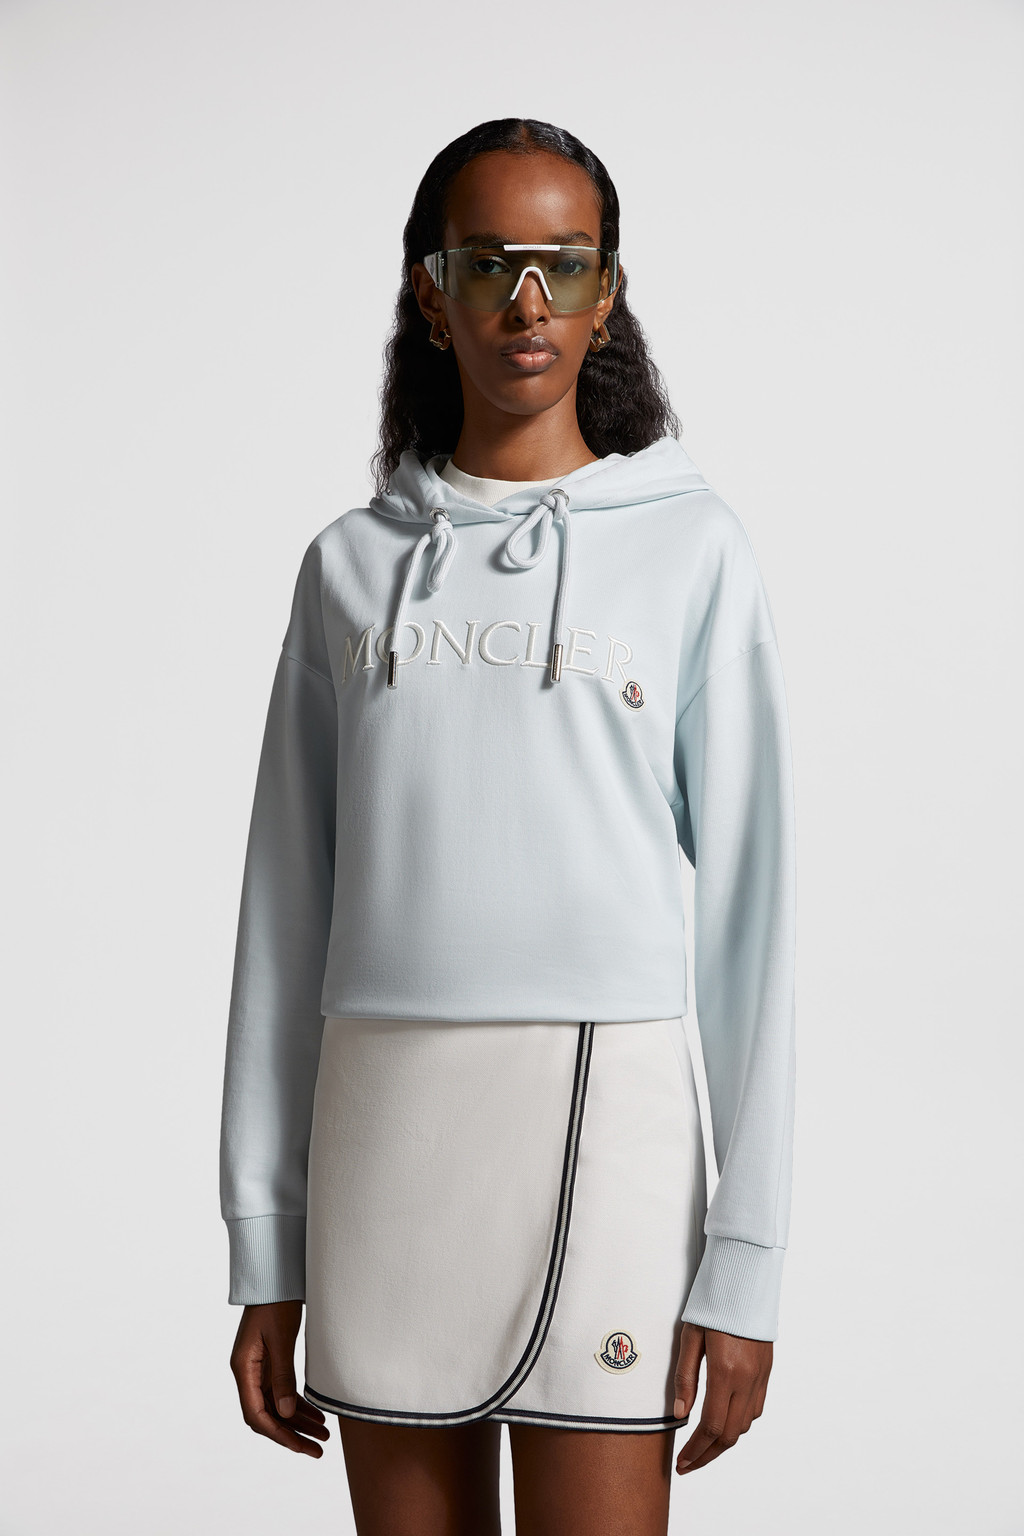 Sweatshirts & Hoodies for Women - High Neck or Padded | Moncler